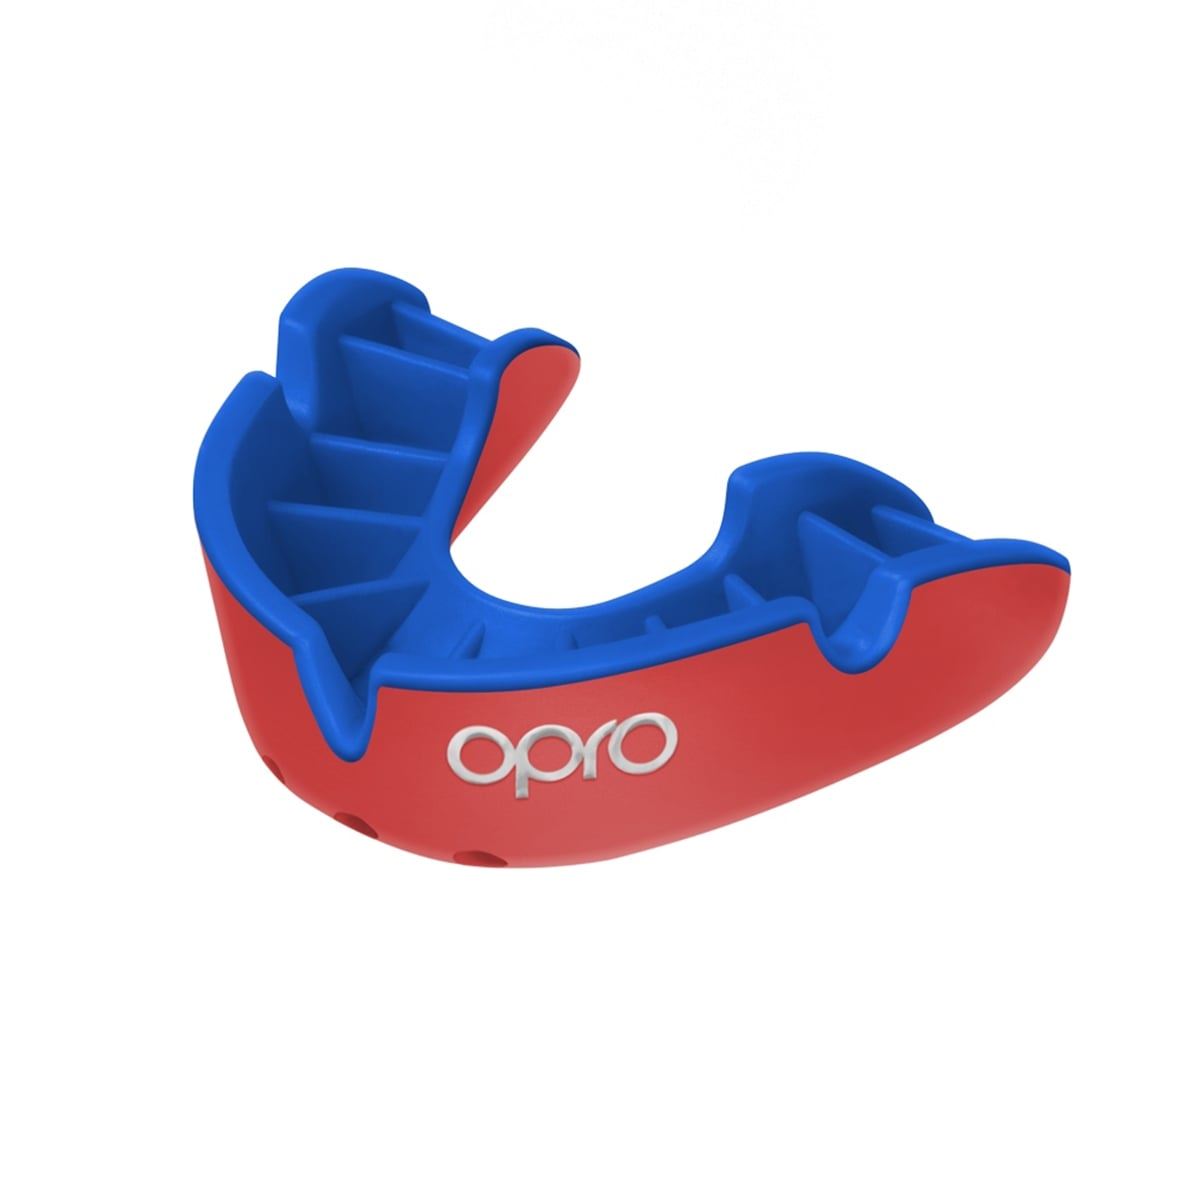 Men's Rugby Protective Mouthguard OPRO Self-Fit Silver 2022 Red/Dark Blue